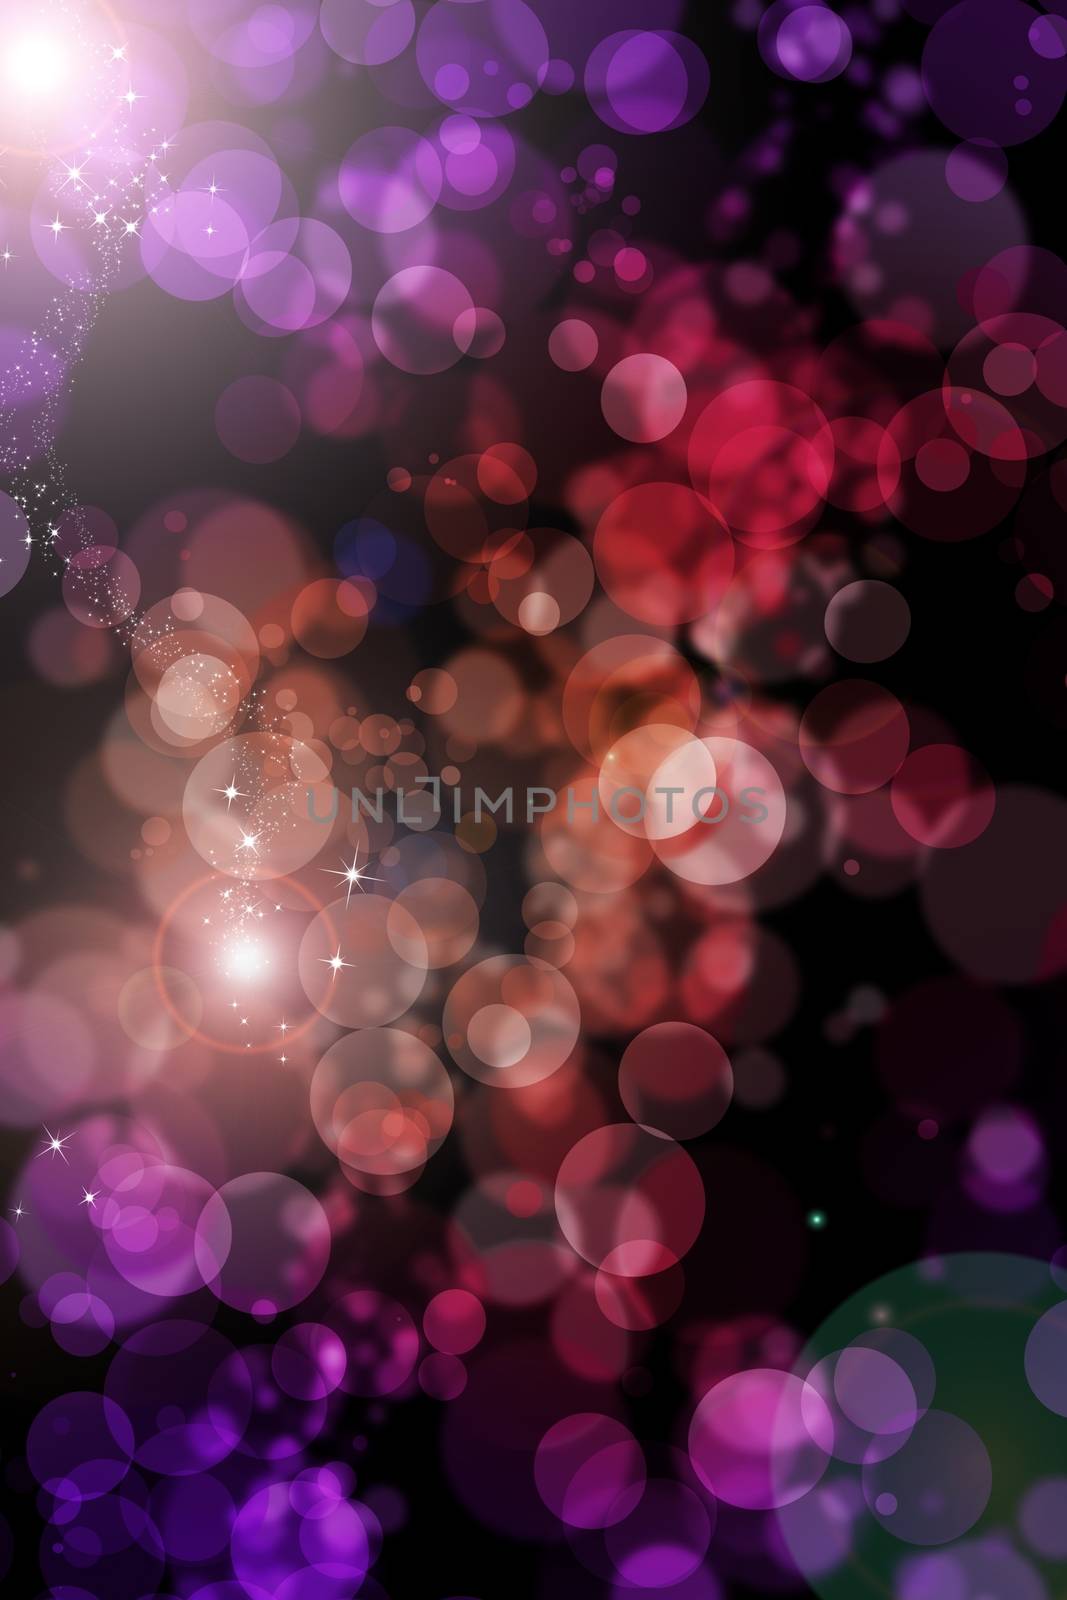 Fantasy Bokeh Background with Some Light Flares ans Stars. Cool Fantasy Vertical Bokeh Background.